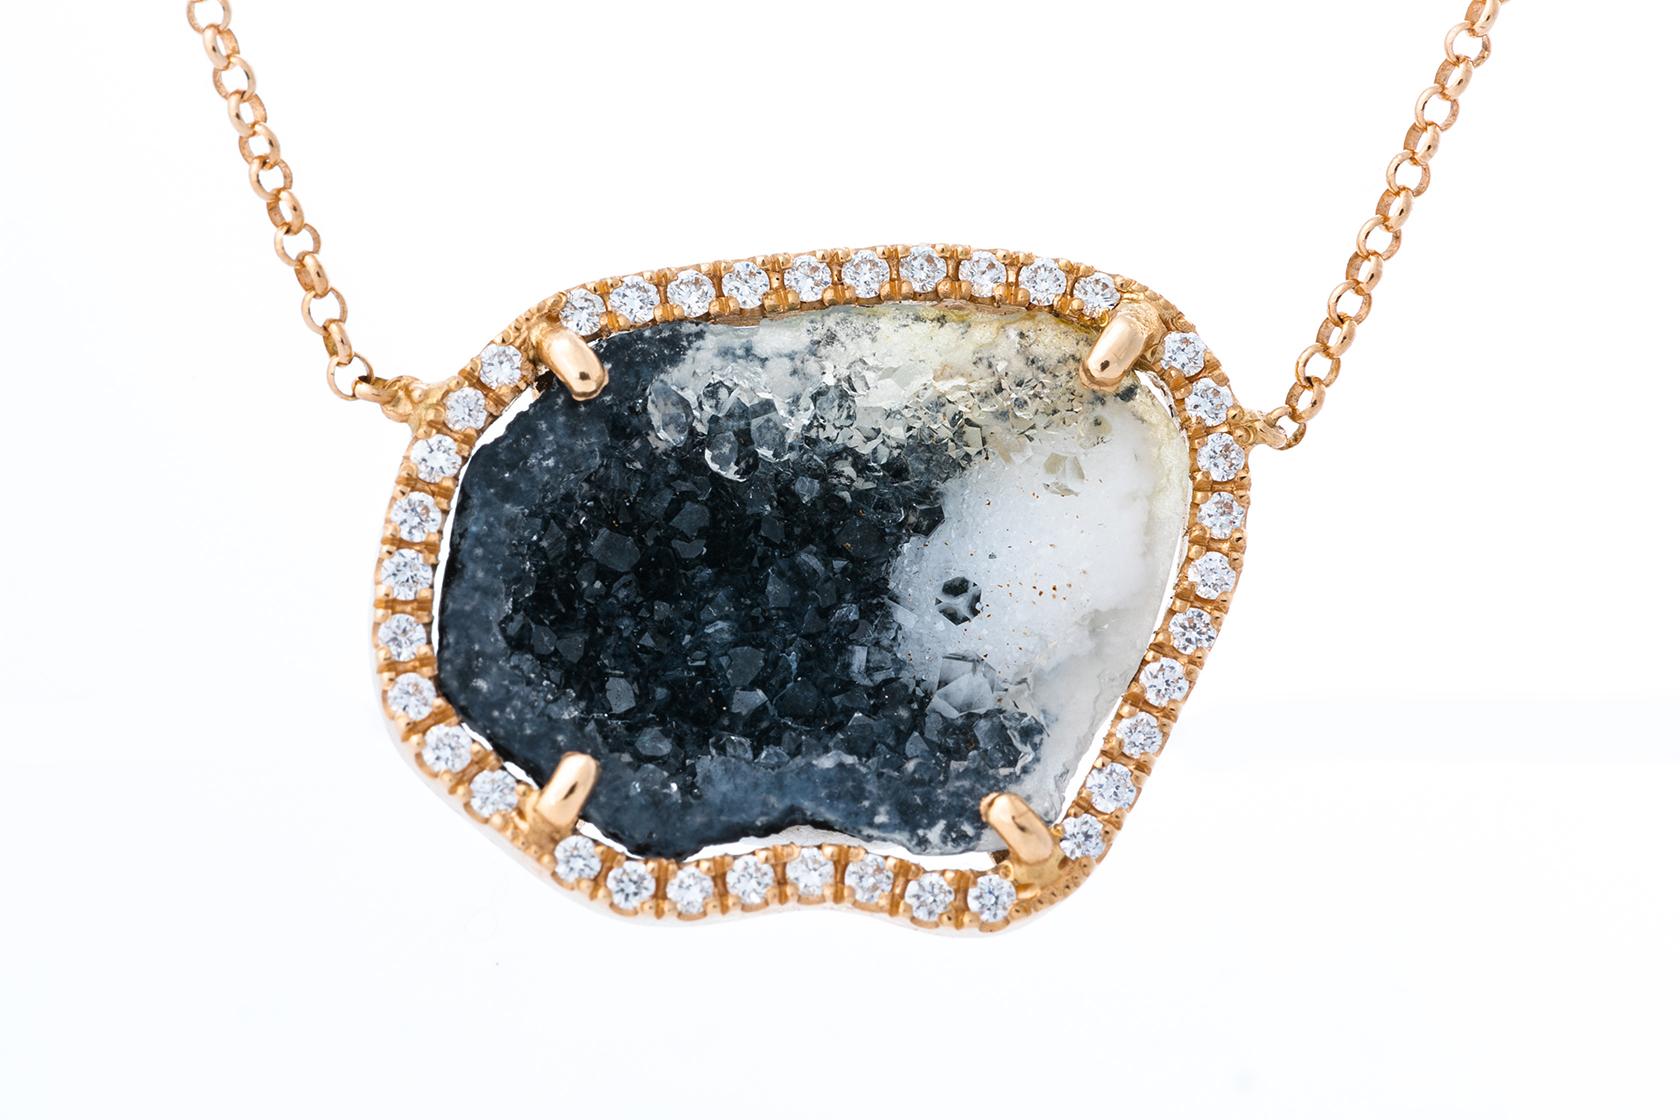 This 18 k rose gold Black/yellow/white Agate pendant has 0.23 ct of dazzling diamonds.
This is the perfect gift for yourself or a special person.
The chain is attached and is 45 cm and adjustable with a sliding ball system.